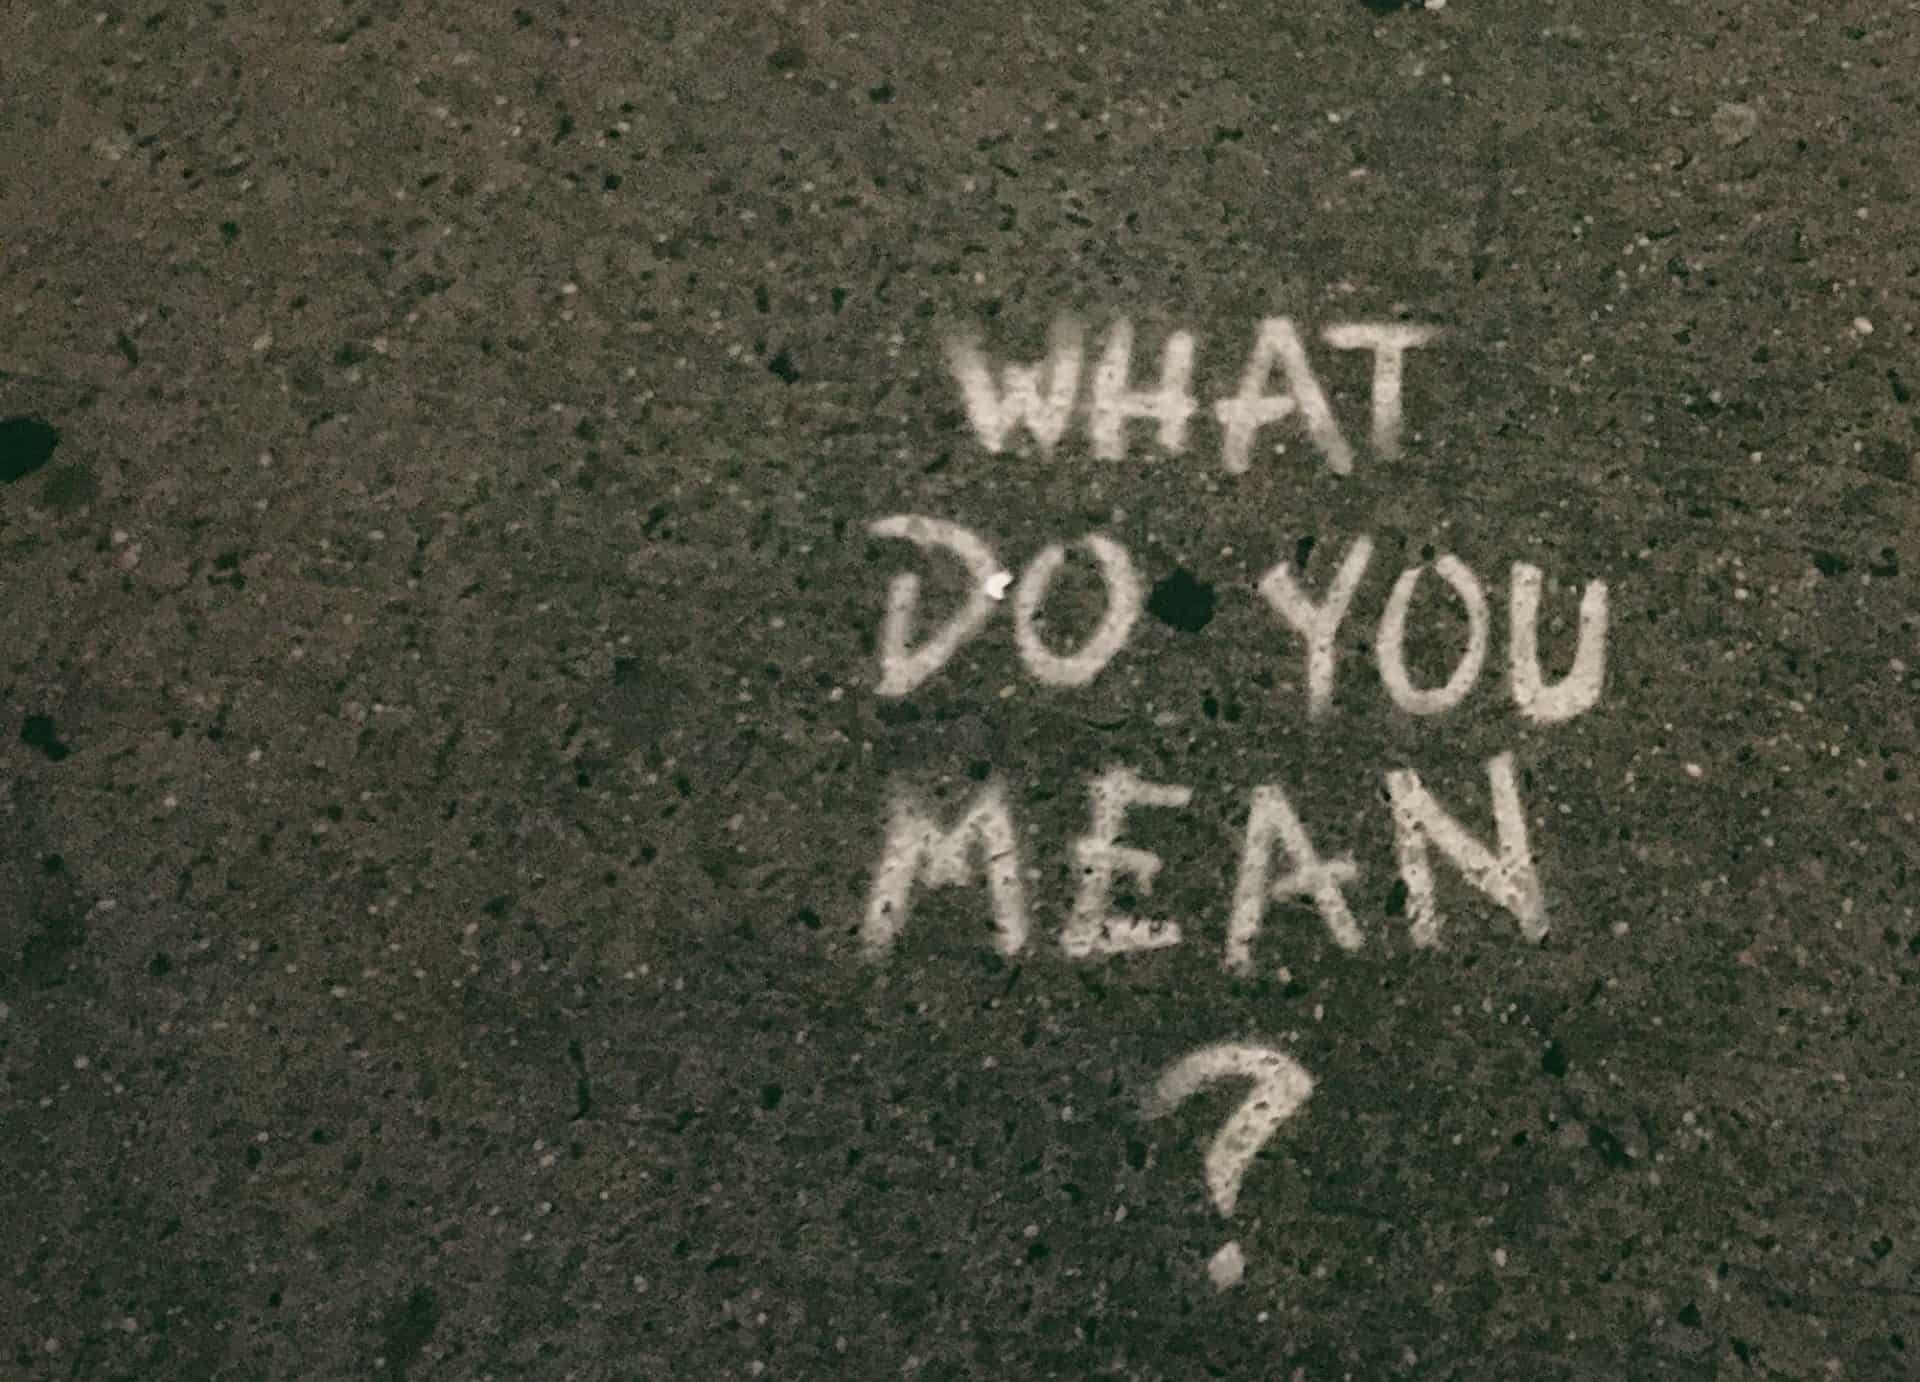 Chalk writing on concrete saying "What do you mean?